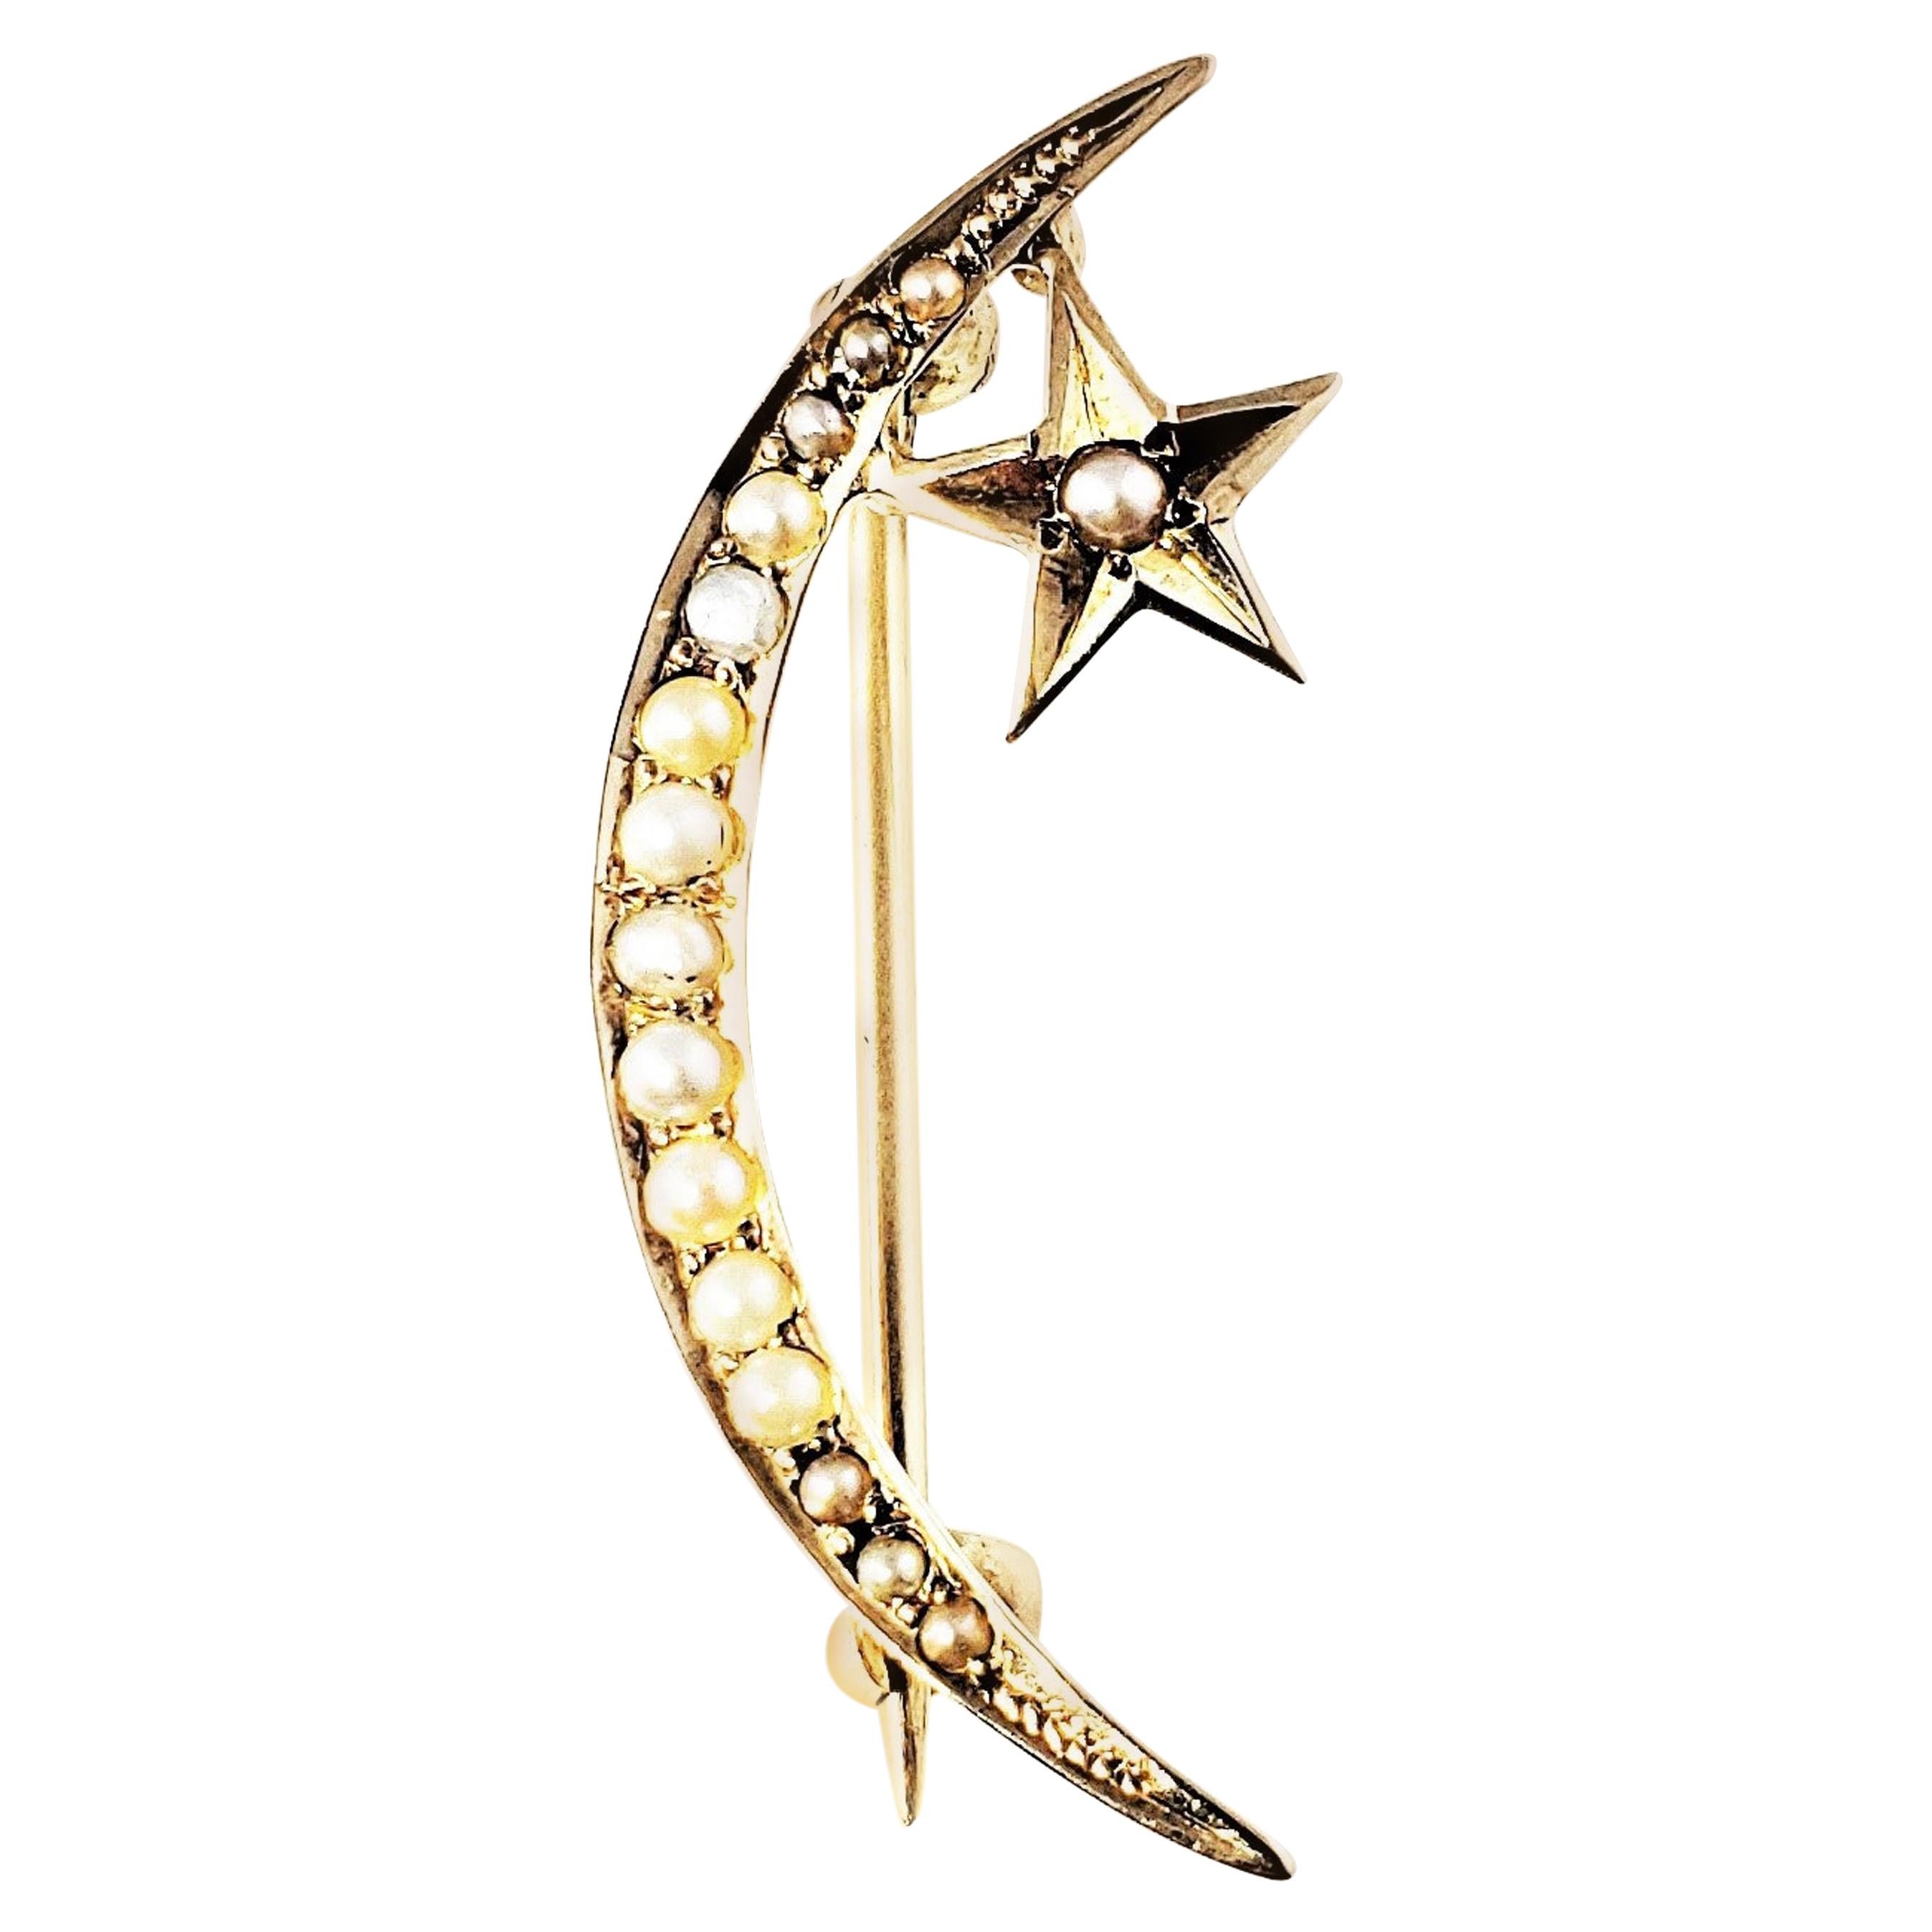 14 Karat Yellow Gold and Seed Pearl Moon and Star Brooch or Pin